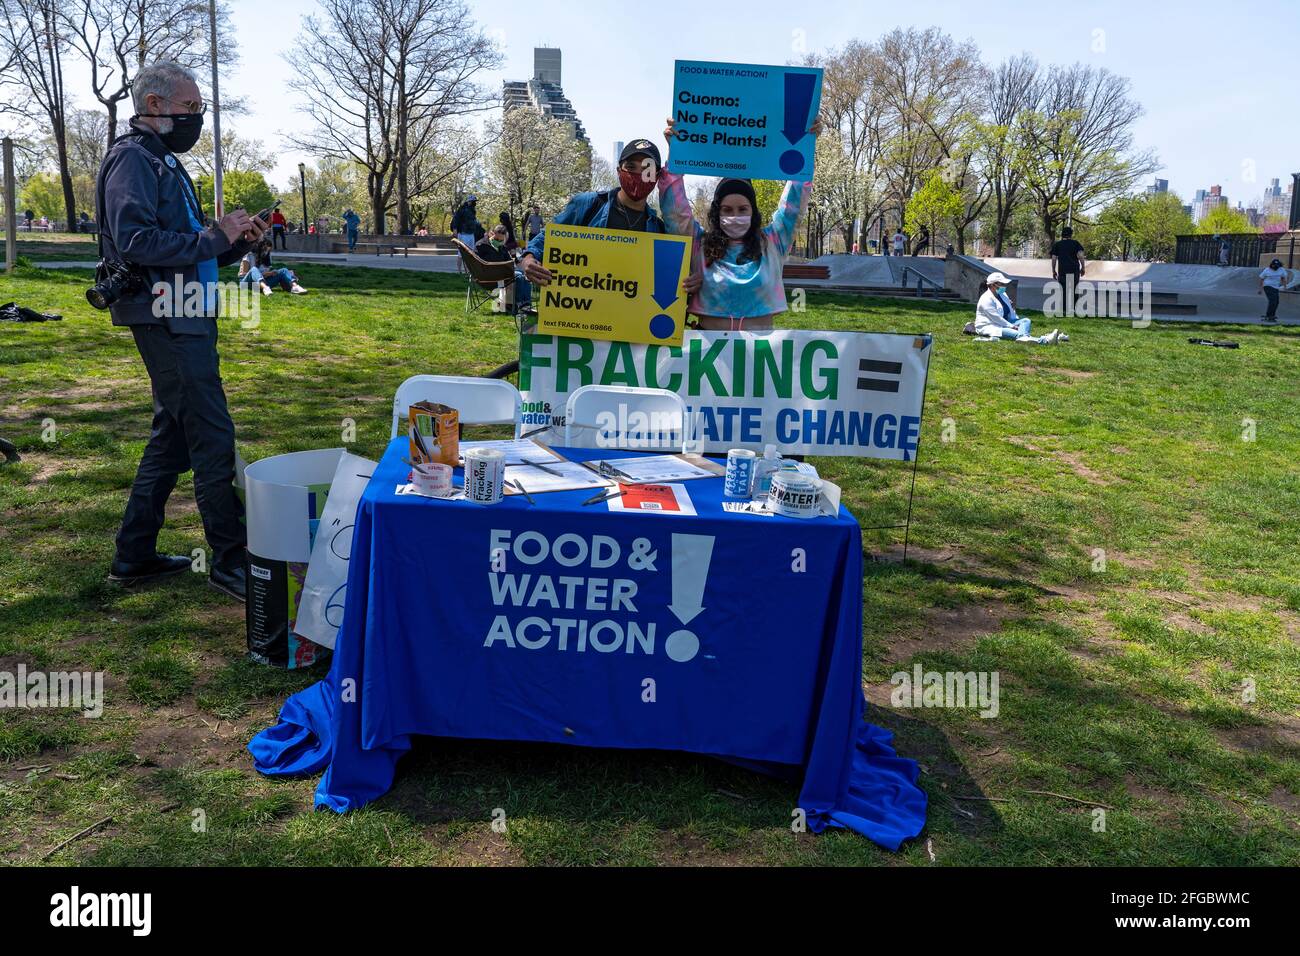 New York, United States. 24th Apr, 2021. Activists seen at a Food and Water table with signs during an Earth Day Celebration in Astoria Park.Congresswoman Ocasio-Cortez joined by New York State Senator Jessica Ramos and New York Assembly Member Zohran Mamdani for remarks about the NRG Energy, Inc proposal for the Astoria power plant. The Congresswoman opposes NRG's effort to replace their 50-year old turbine at the Astoria 'peaker' plant with a generator that burns fossil fuels extracted by fracking. Credit: SOPA Images Limited/Alamy Live News Stock Photo